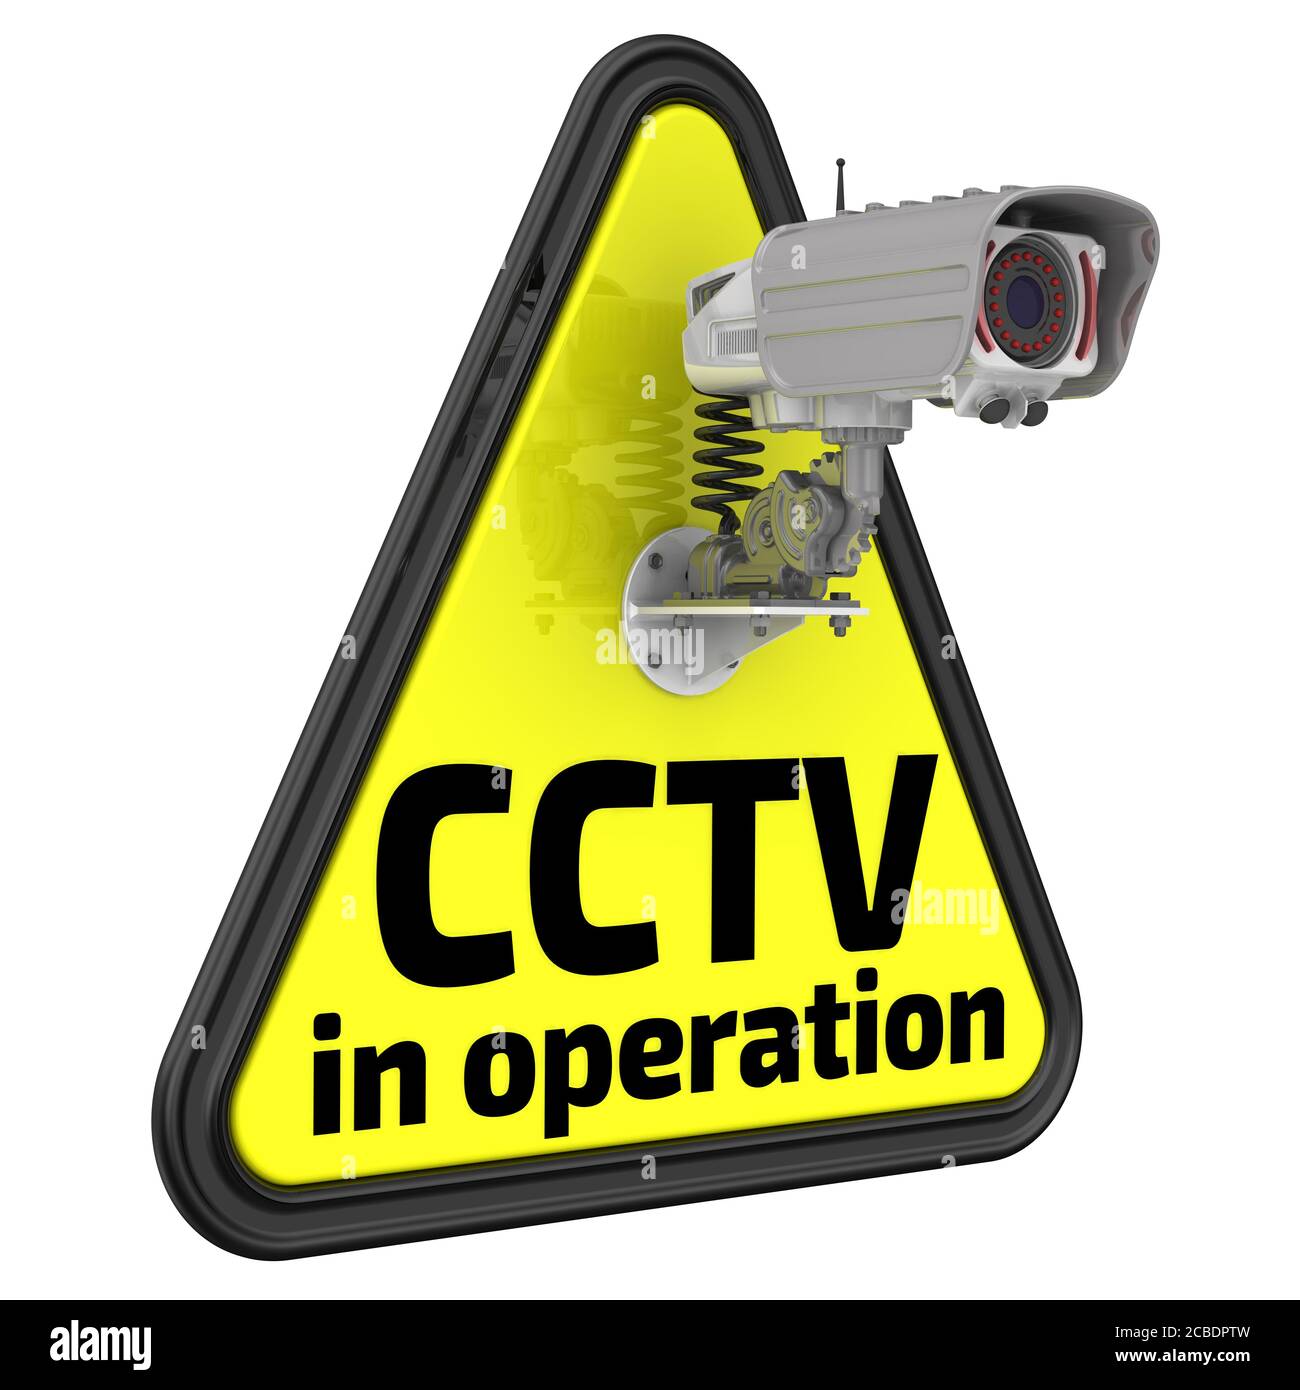 CCTV in operation. The road sign. Yellow road sign with inscription 'CCTV in operation' and CCTV camera. 3D illustration. Isolated Stock Photo